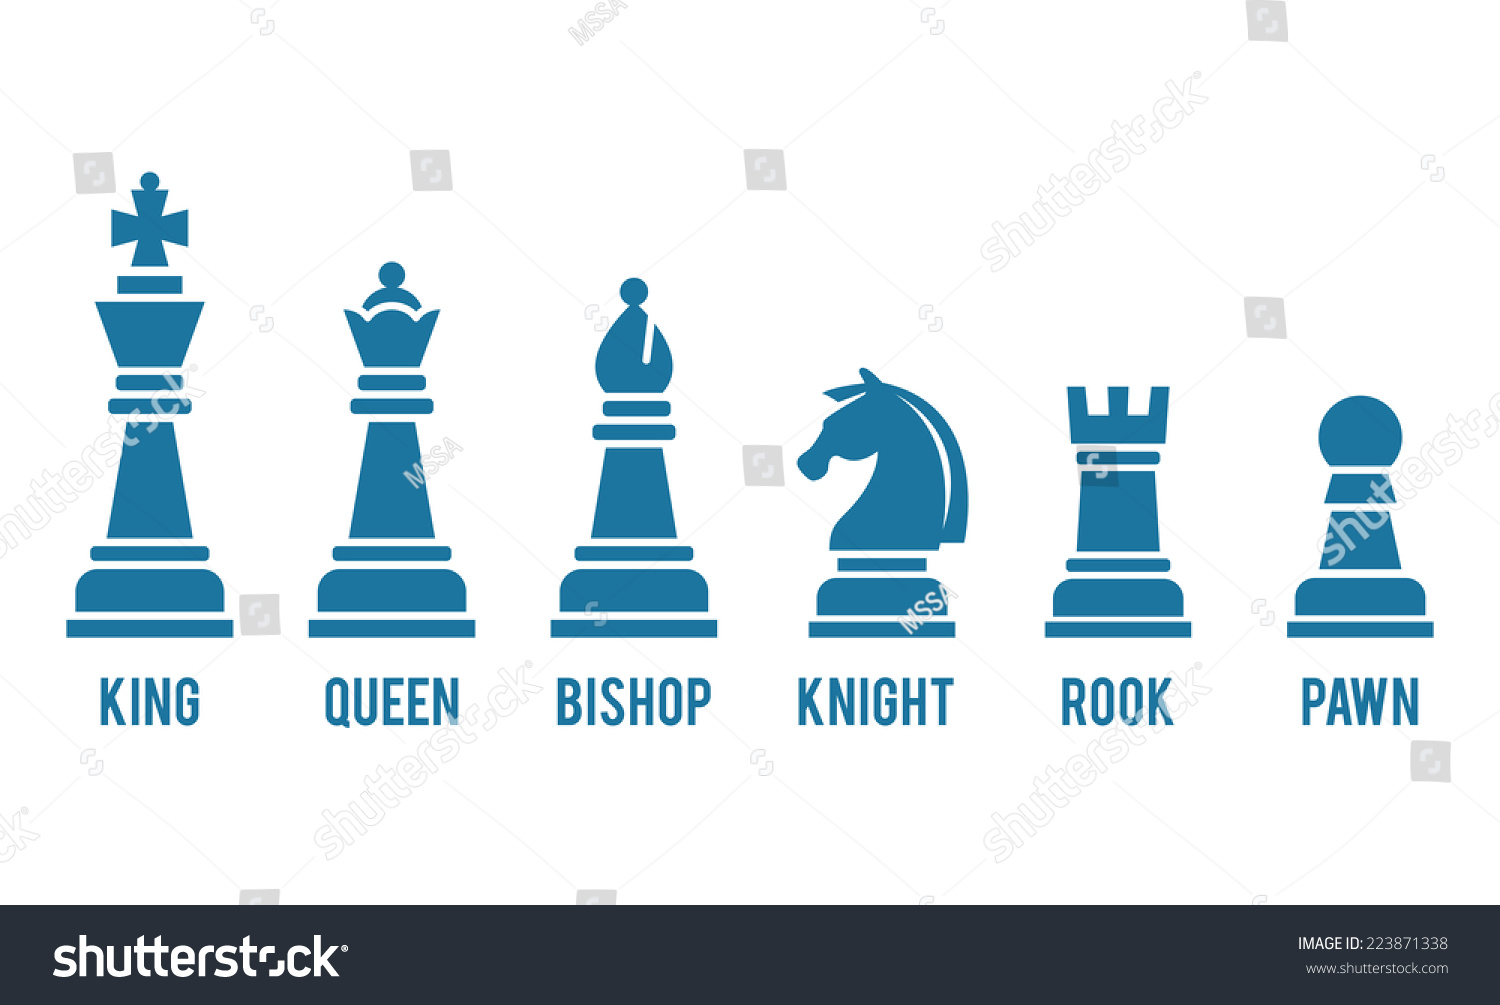 Set Of Named Chess Piece Vector Icons In Blue Silhouettes On White ...